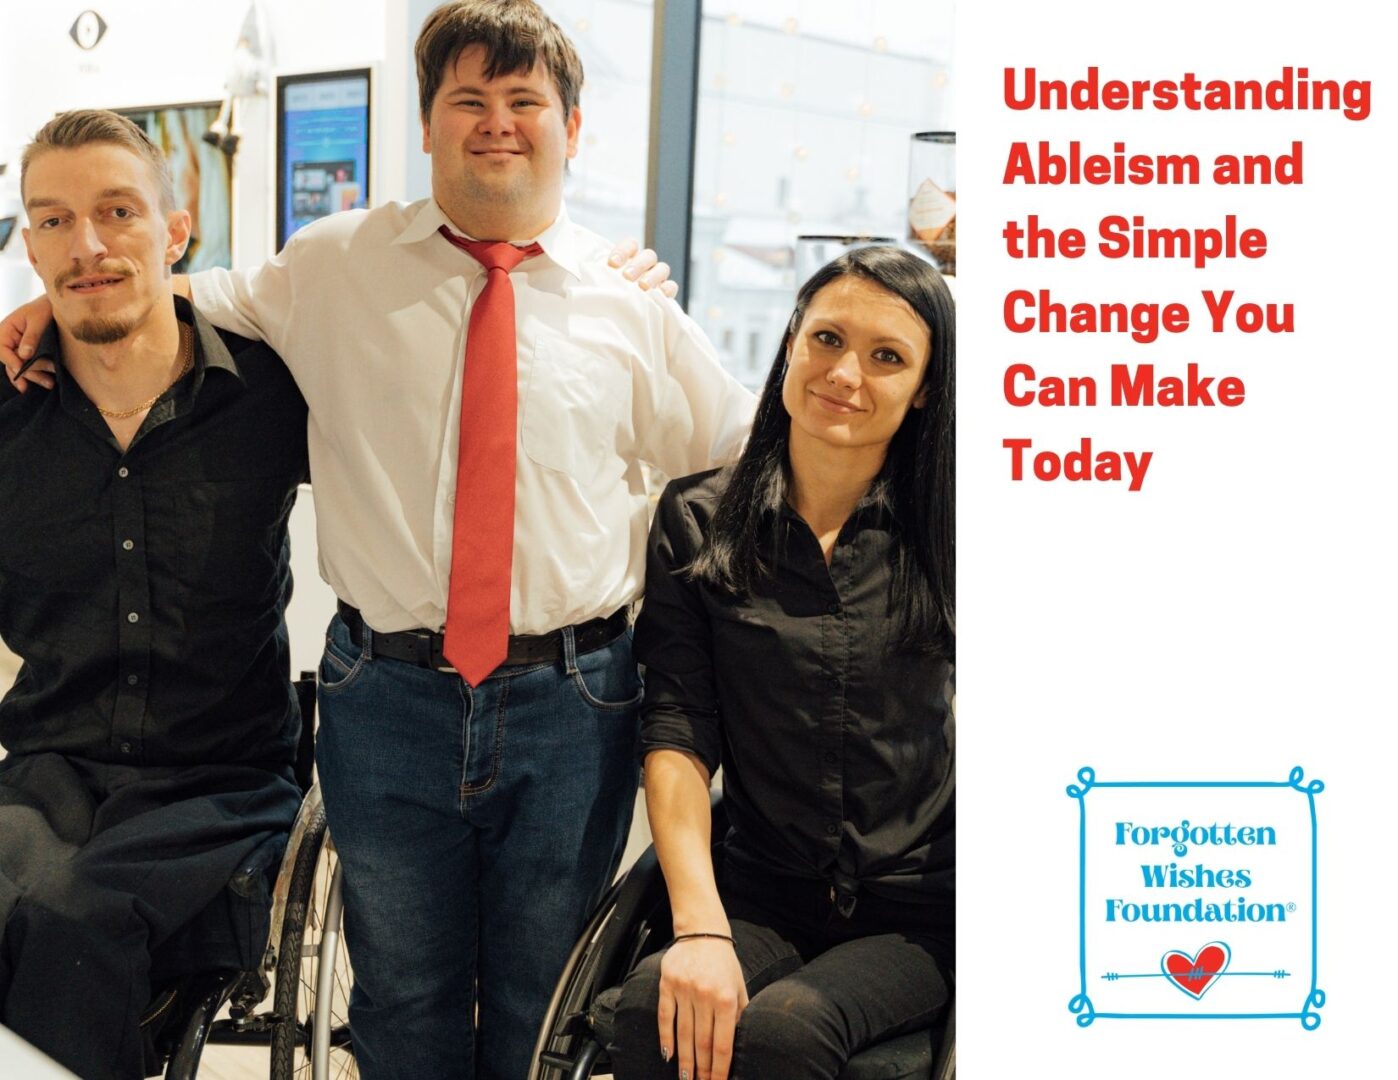 Two individuals using a wheel chair sit next to a young man in a white shirt and red tie. The image is reflective of people with disabilities